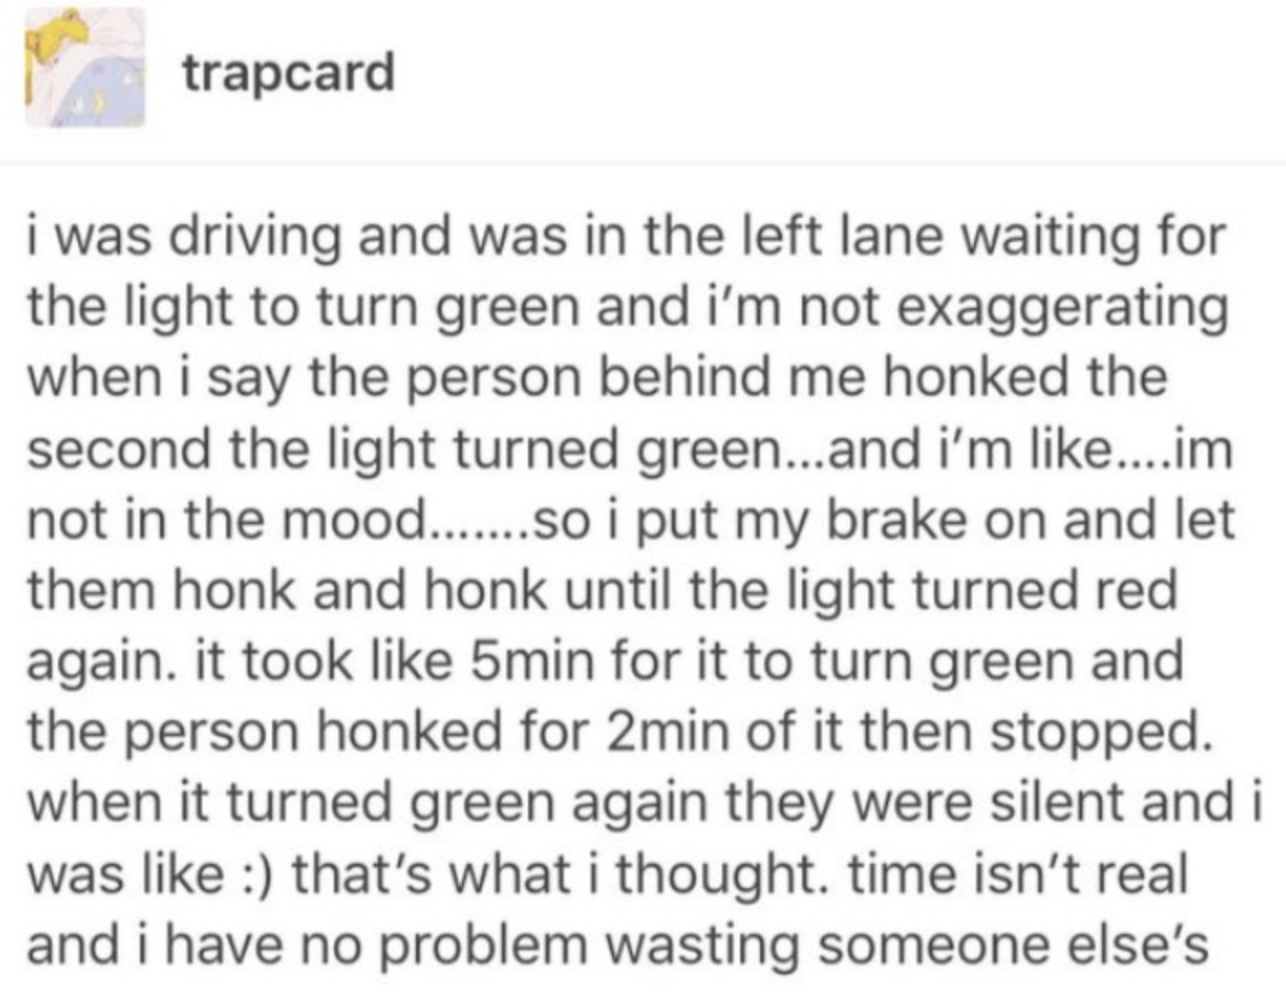 A Tumblr post about someone purposely waiting at a green light